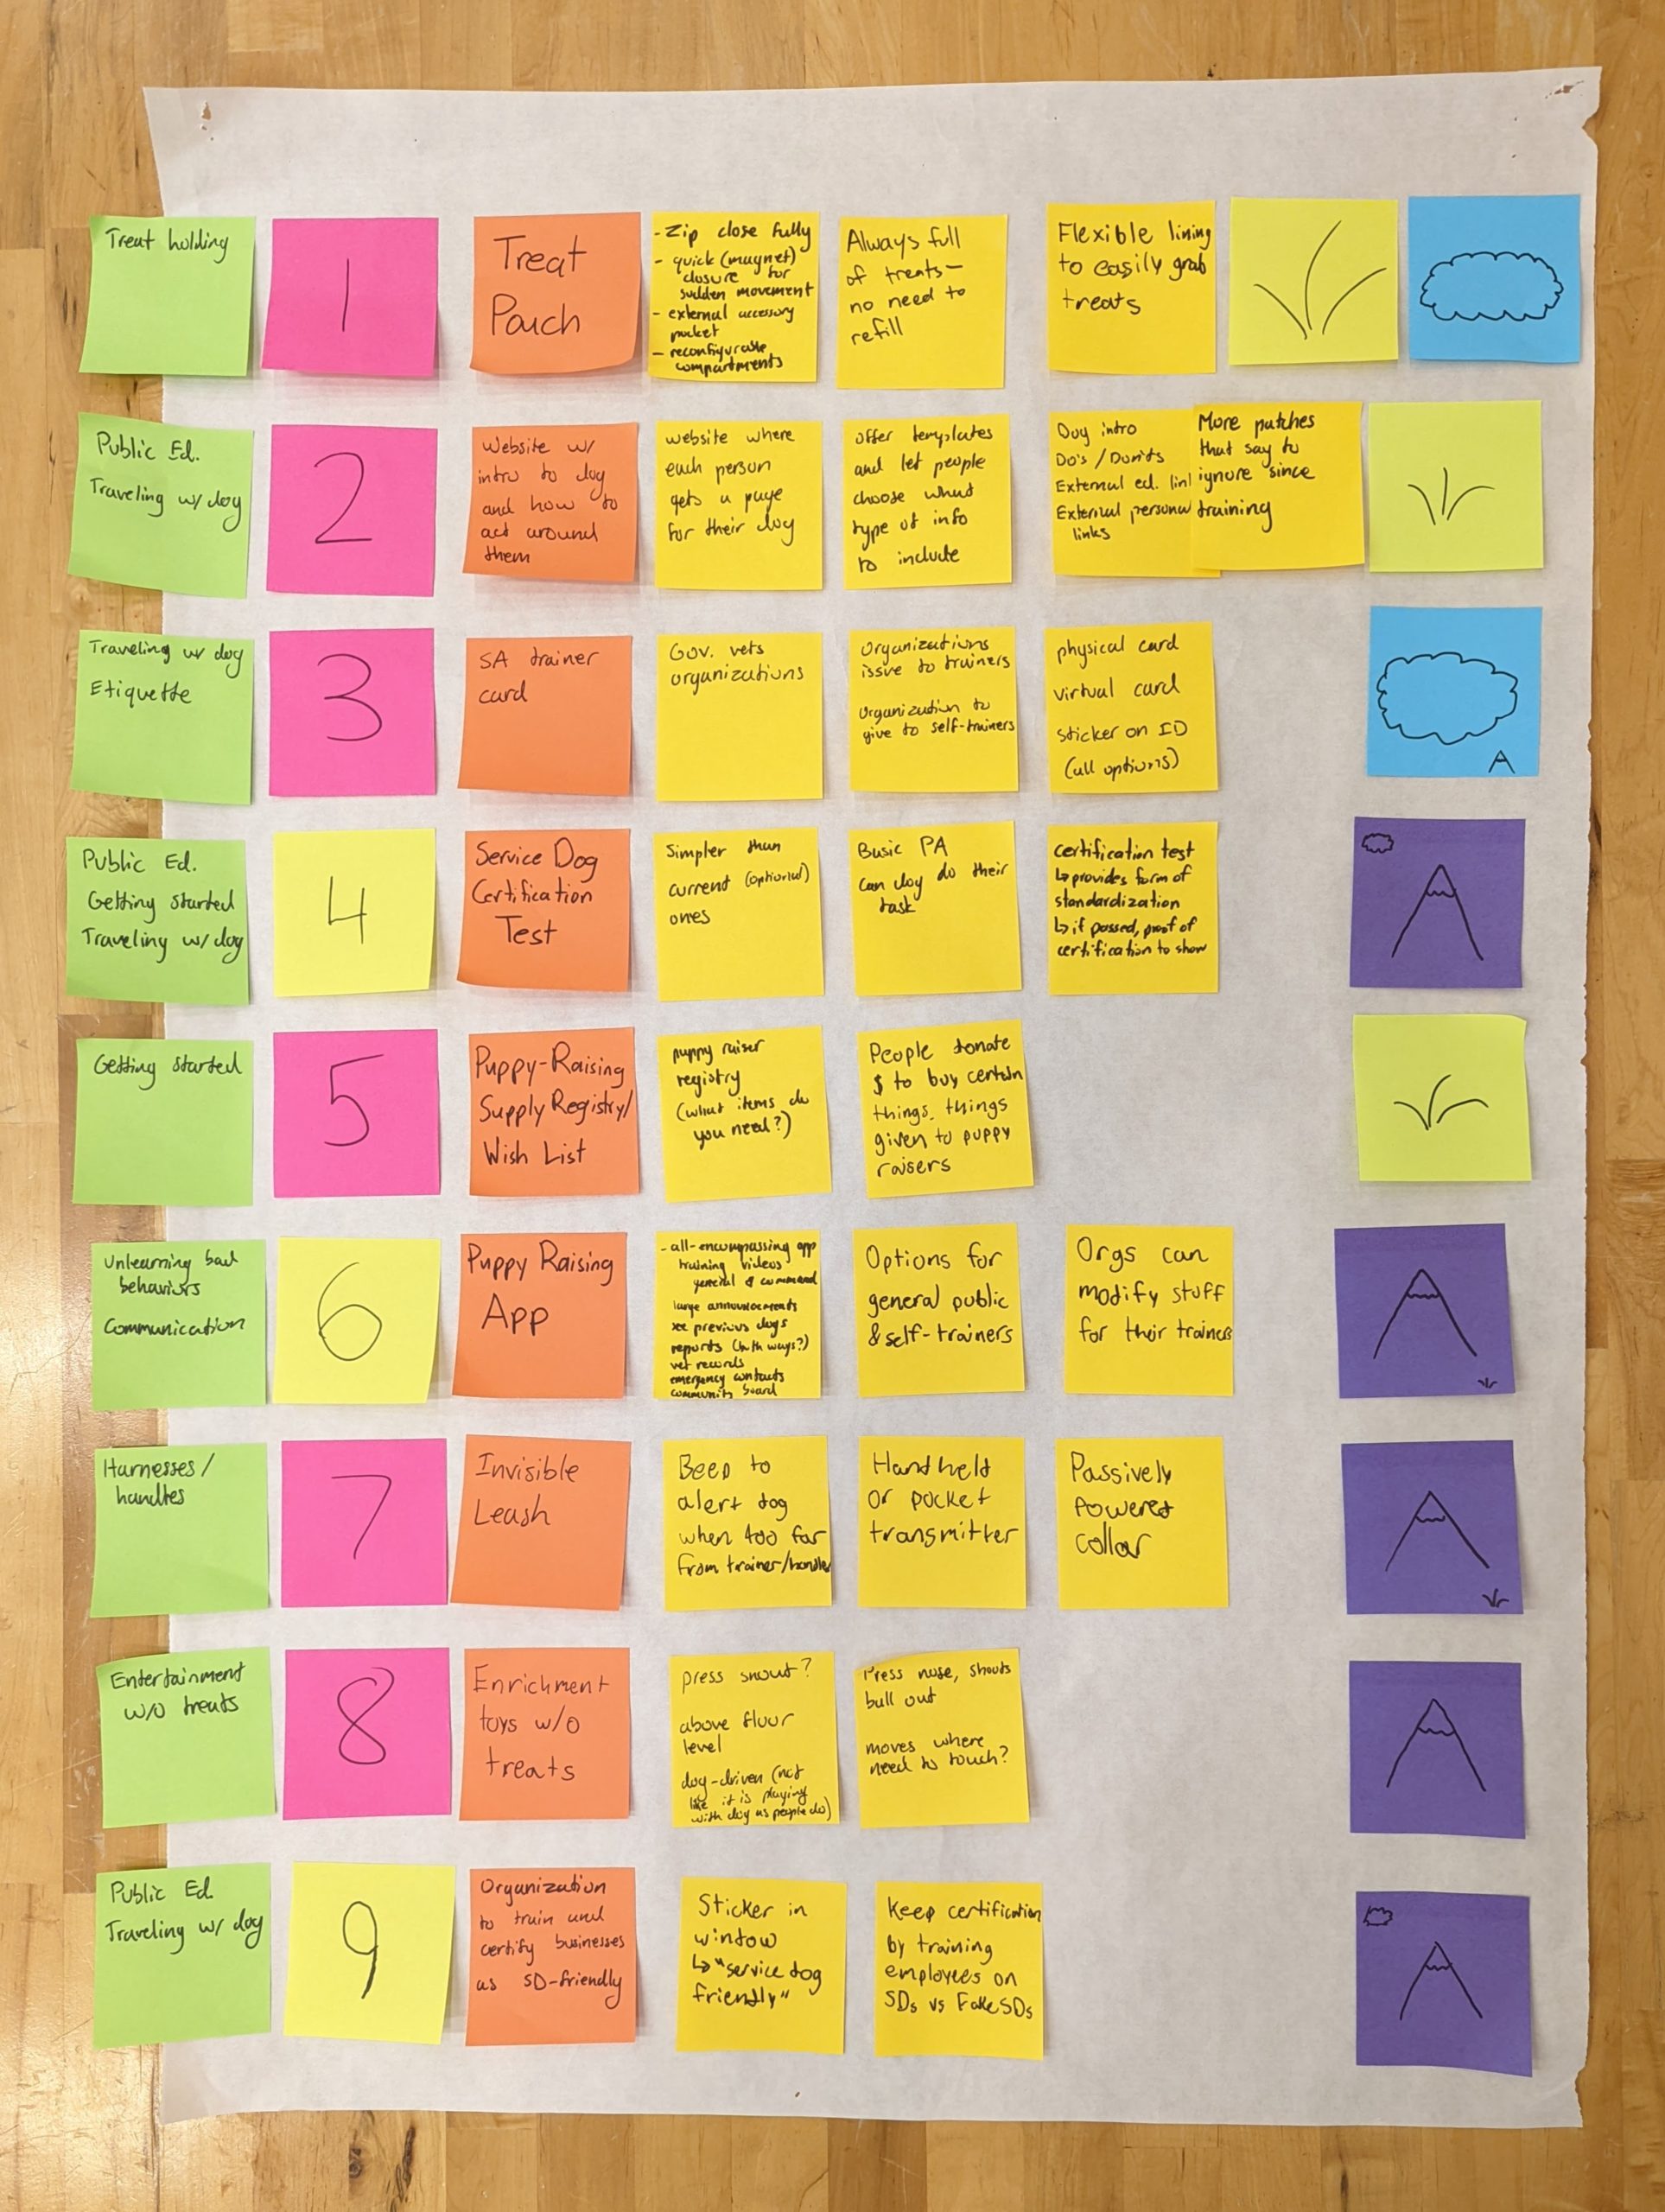 Colorful sticky notes explaining 10 ideas and labeling their feasibility